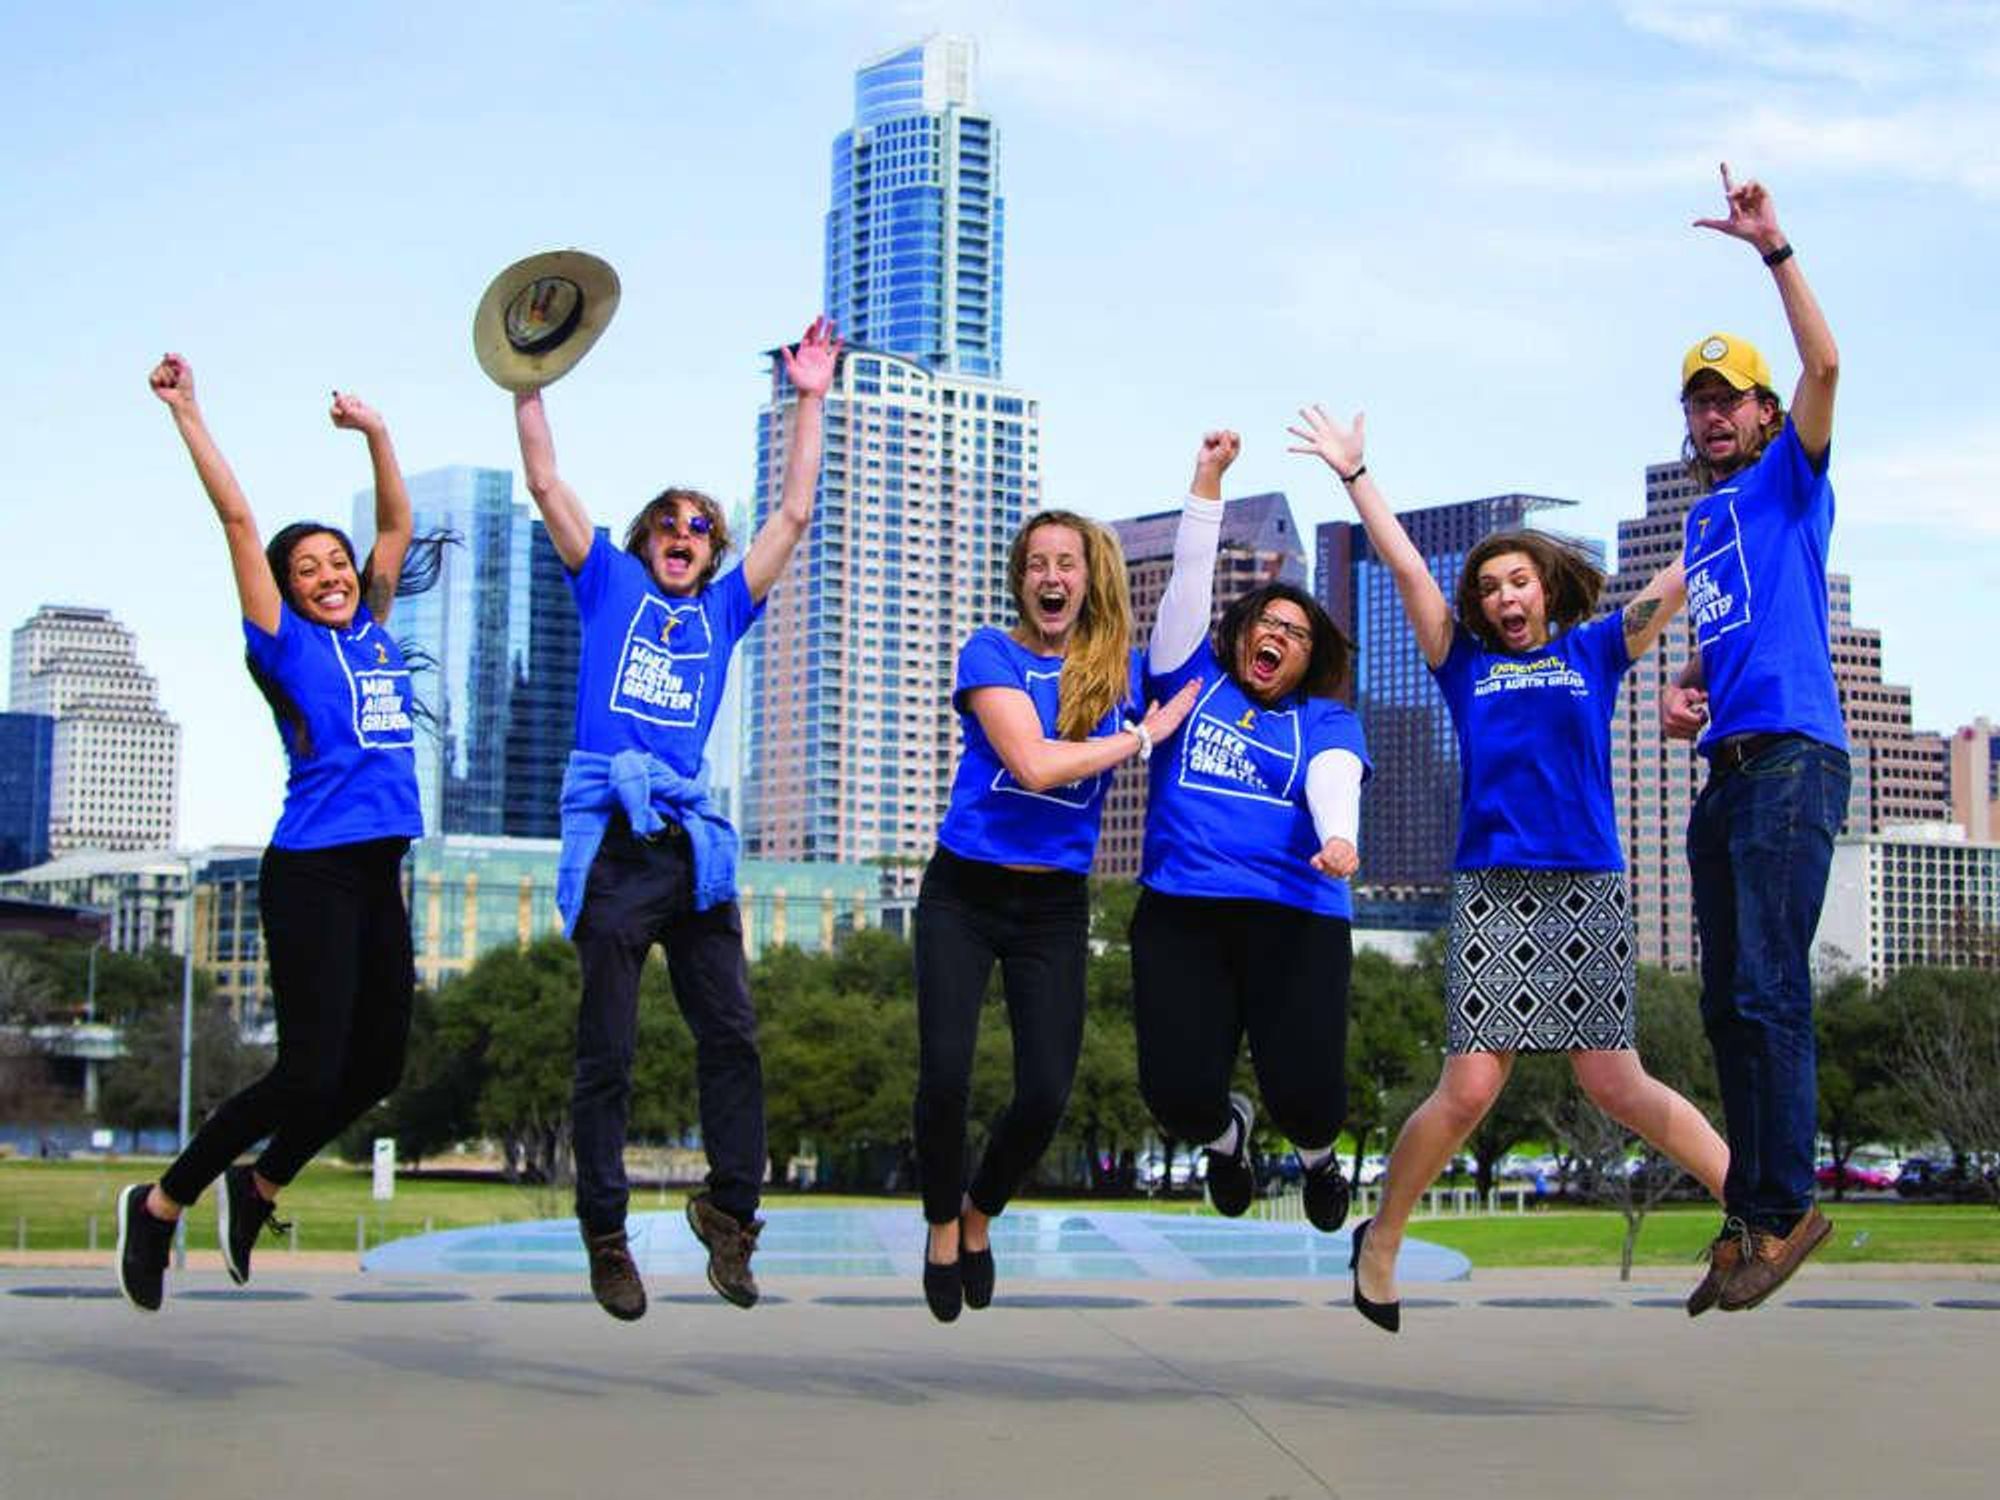 United Way for Greater Austin presents Ruthless Good: The Great Austin Scavenger Hunt